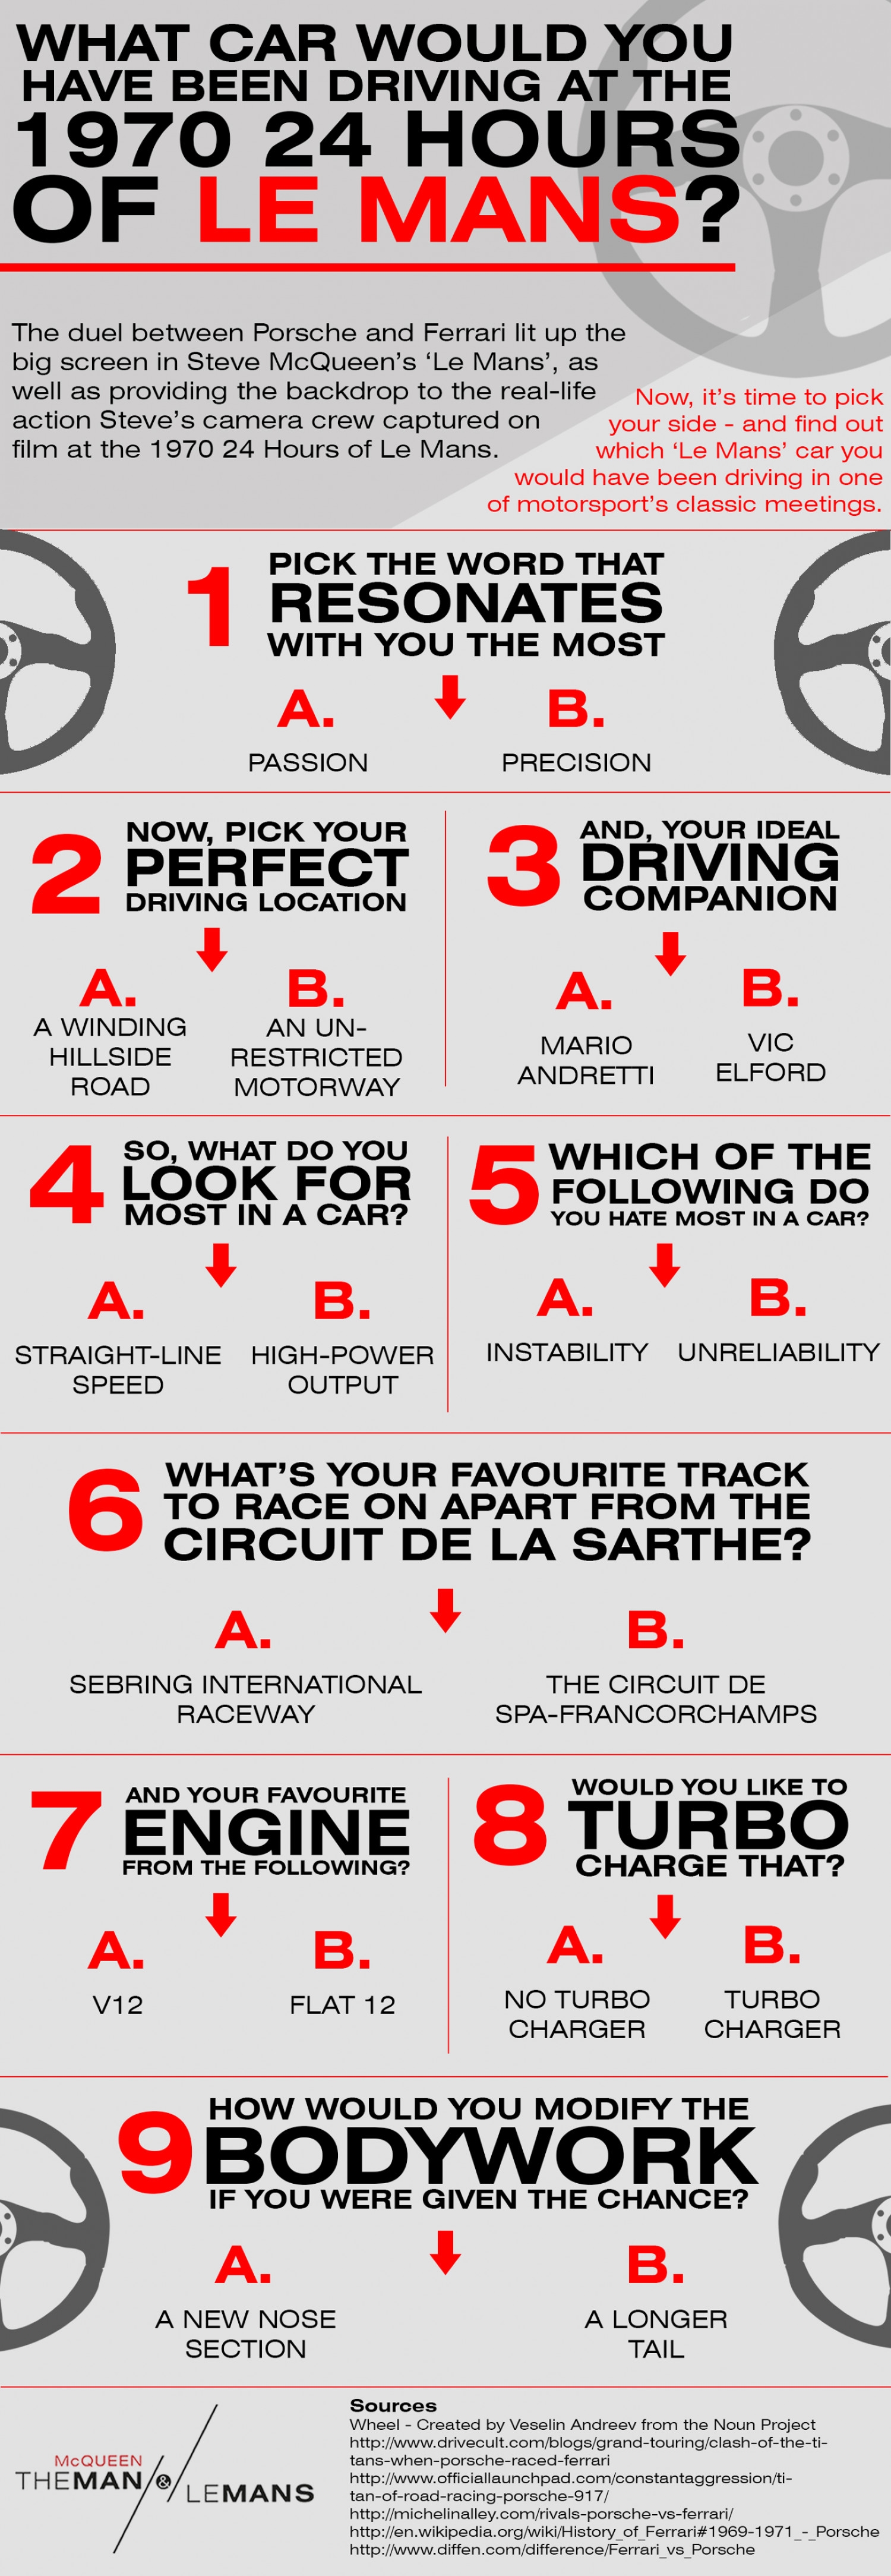 What Car Would You Have Been Driving at the 1970 24 Hours of Le Mans?  Infographic